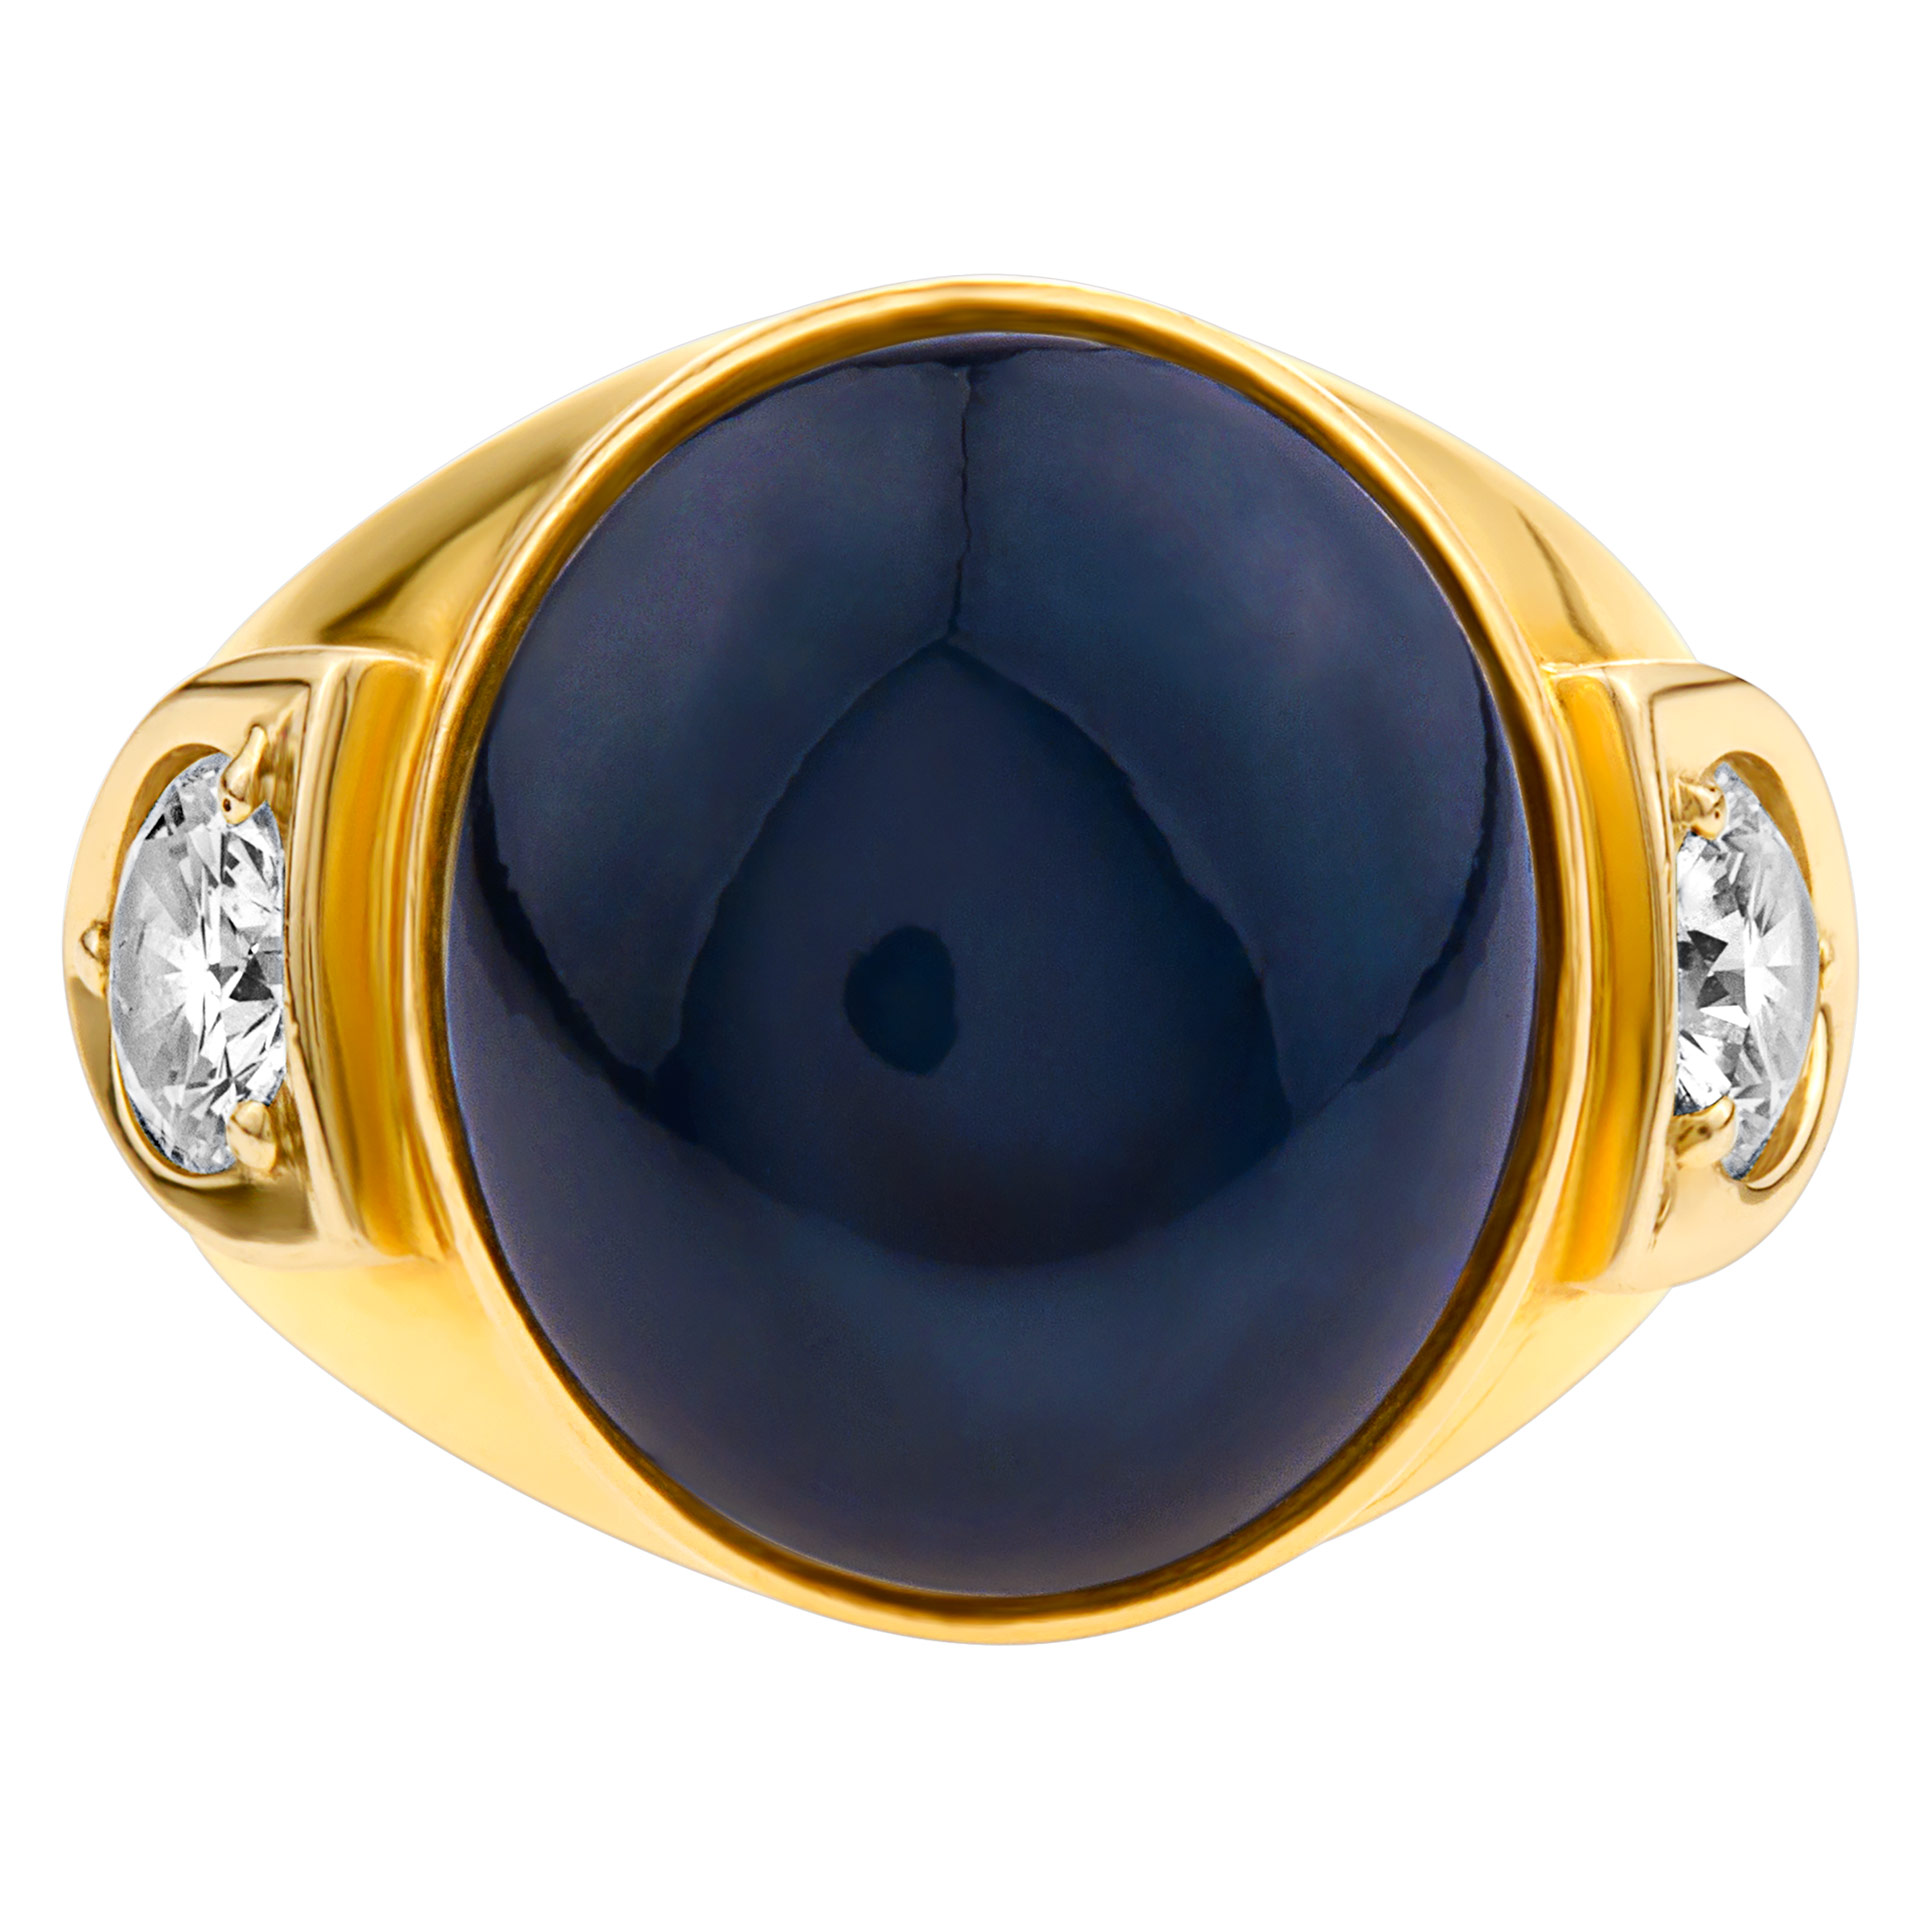 Star Sapphire ring set in 14k yellow gold